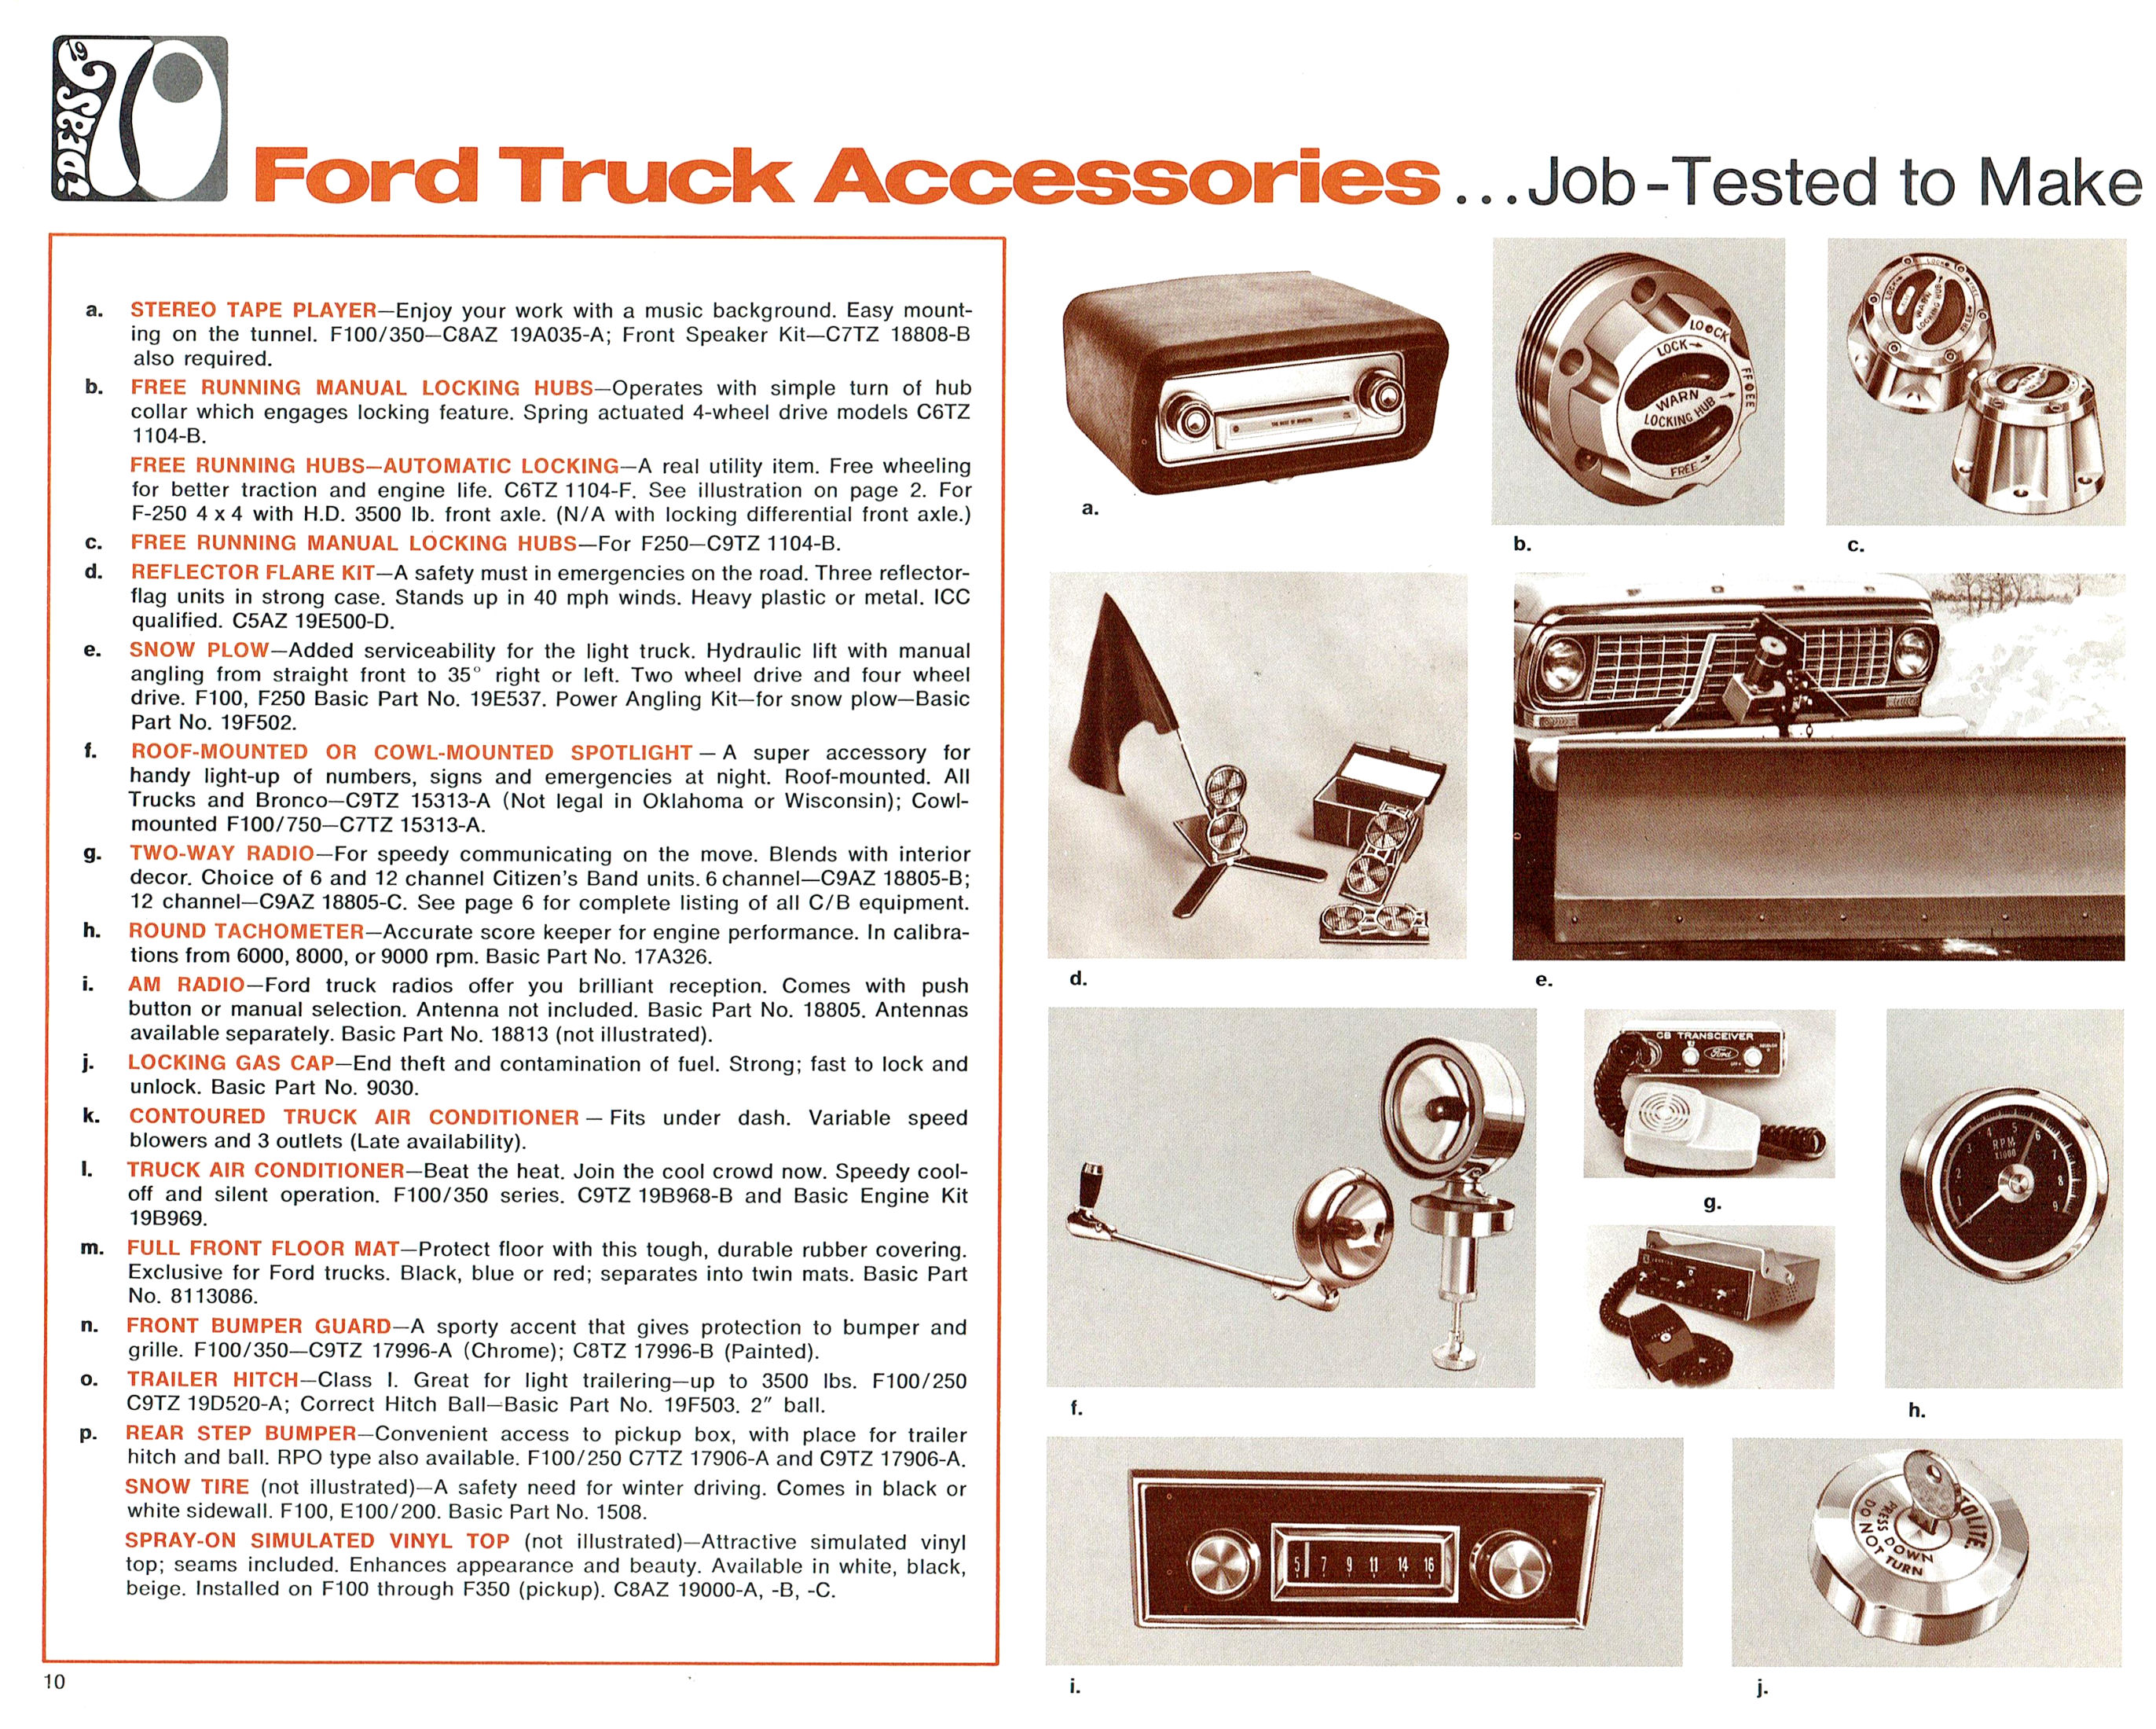 1970 Ford Truck Accessories-10